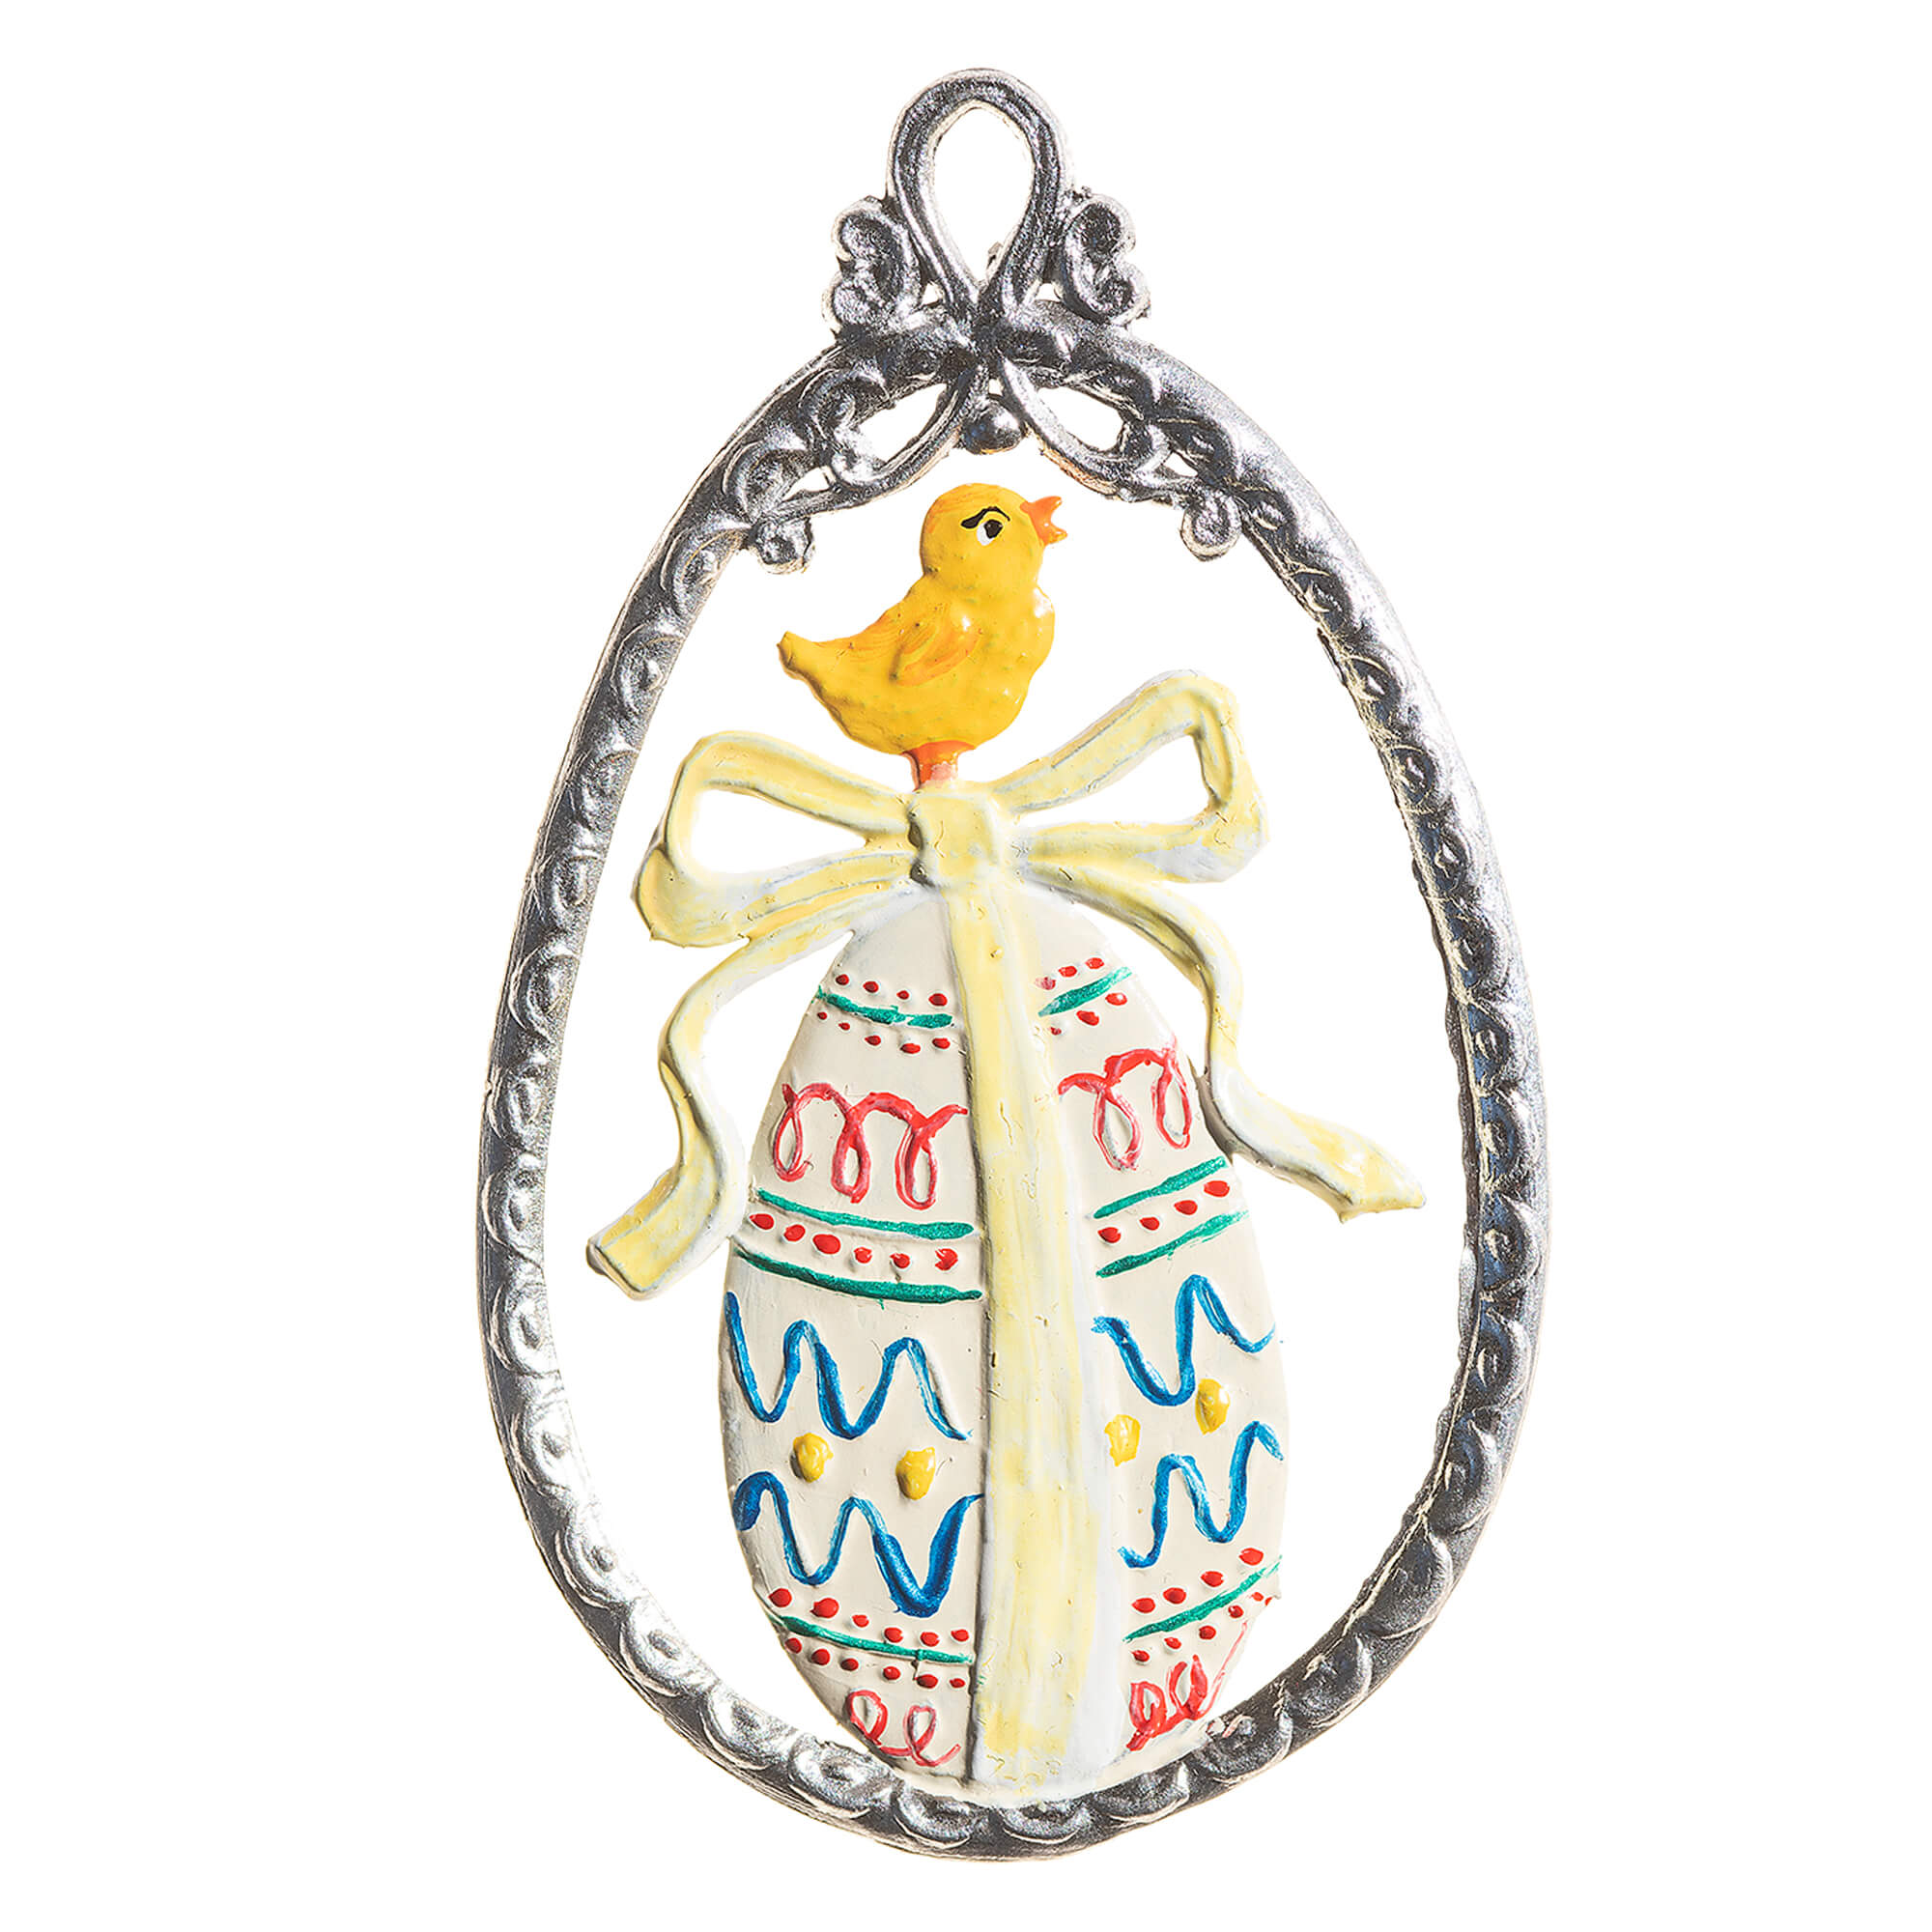 EO01 Decorated Egg Ornament